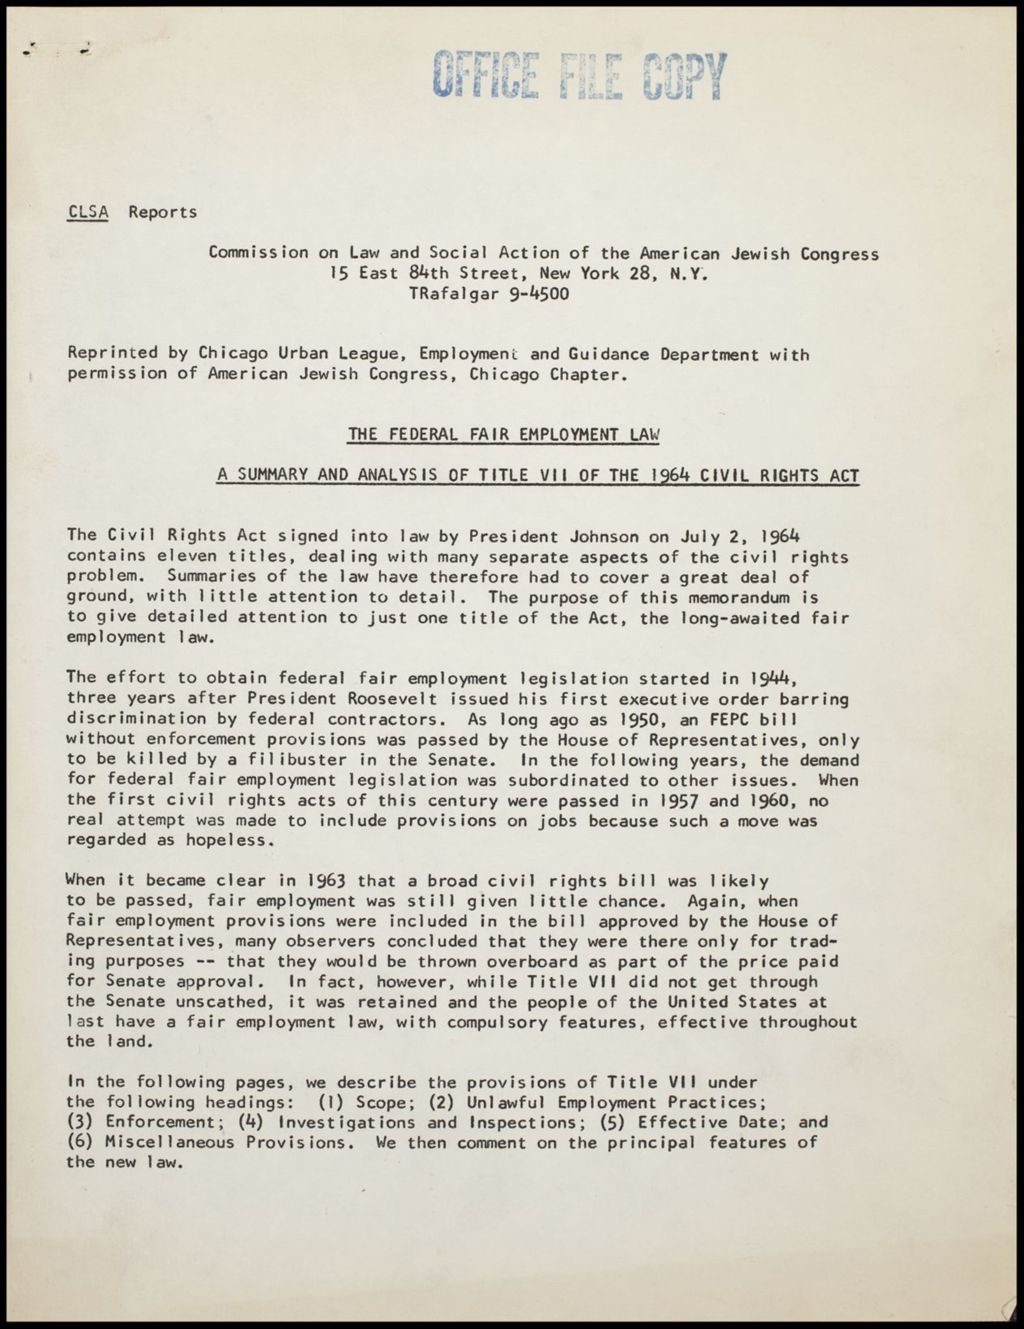 Summary and Analysis Civil Rights Act and Challenge from the Nixon Administration, 1969 (Folder III-2938)